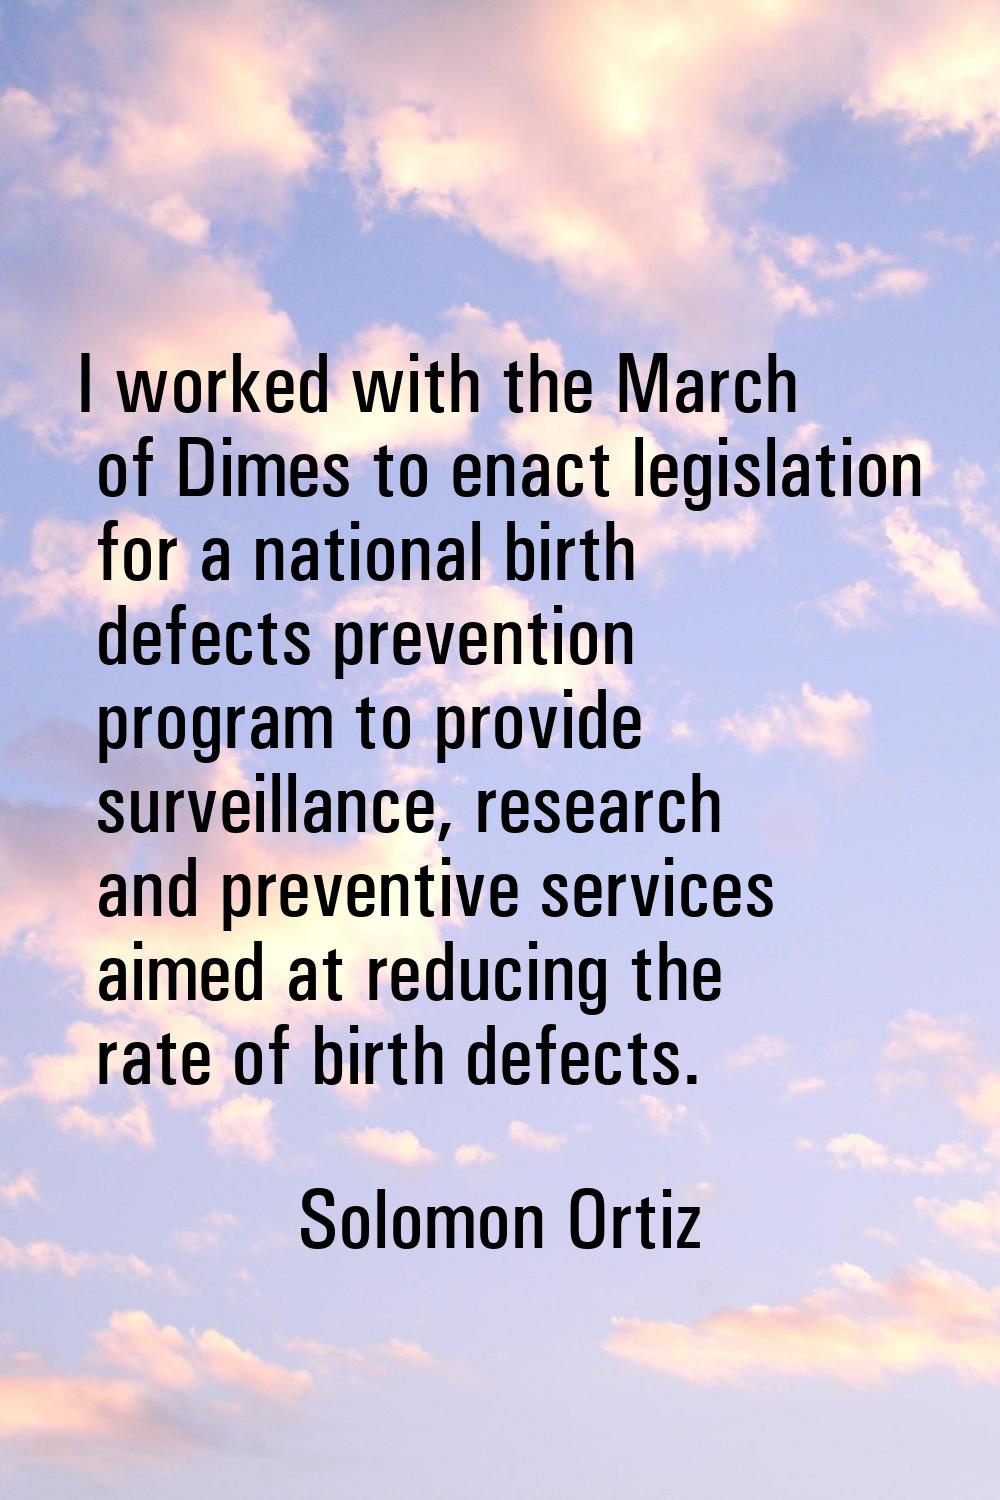 I worked with the March of Dimes to enact legislation for a national birth defects prevention progr